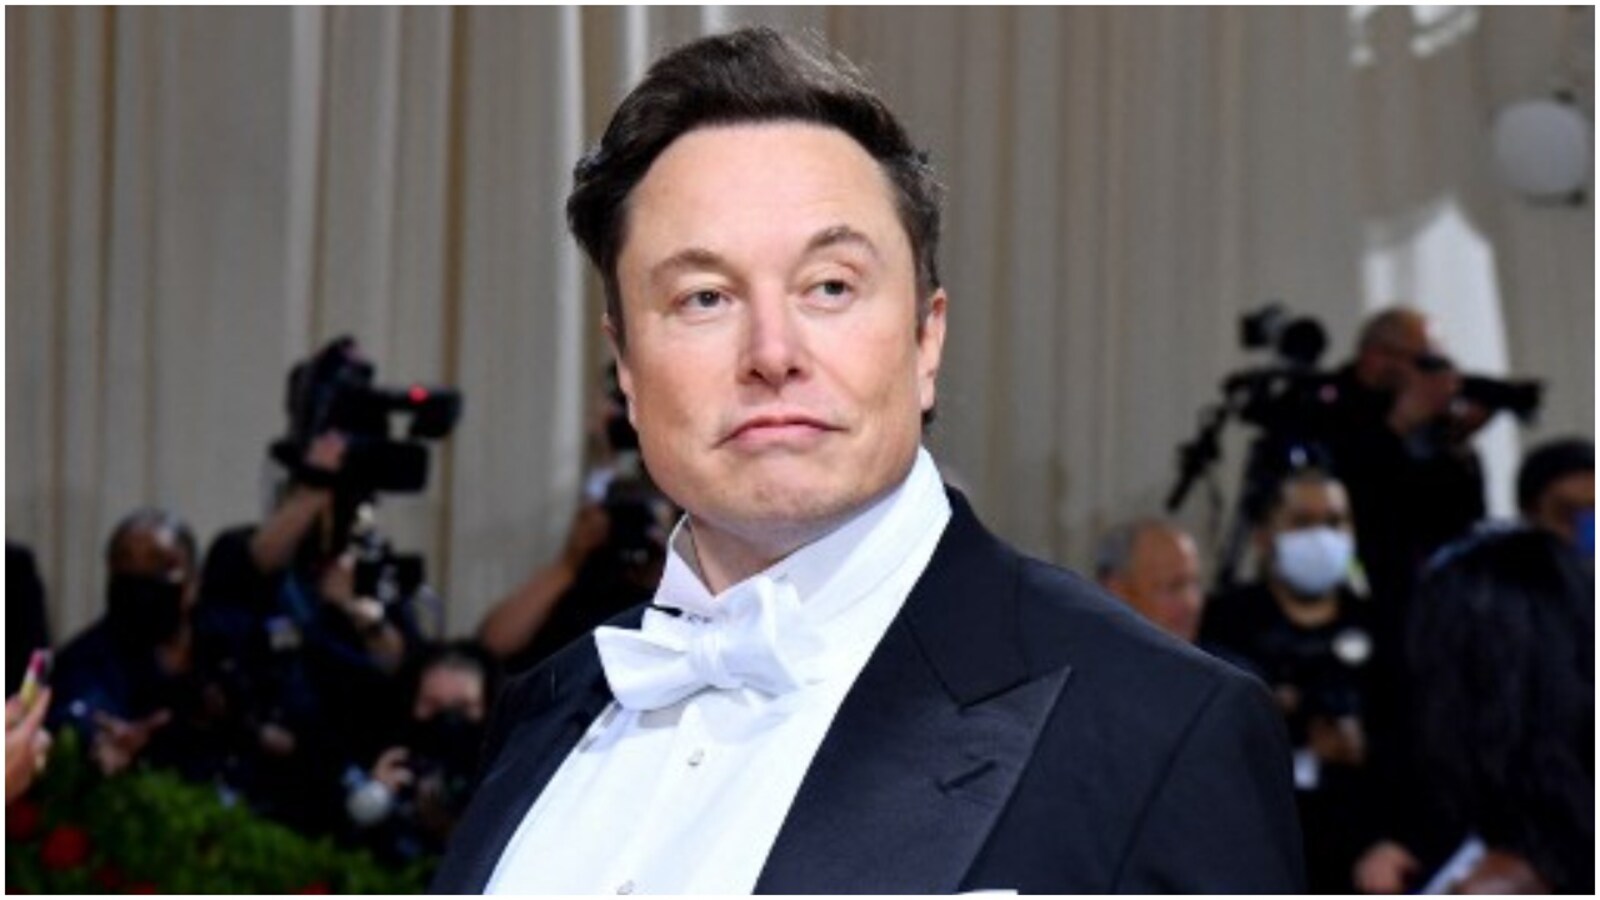 Elon Musk gets booed during surprise appearance at talk show. Says 'I'm  rich, b****